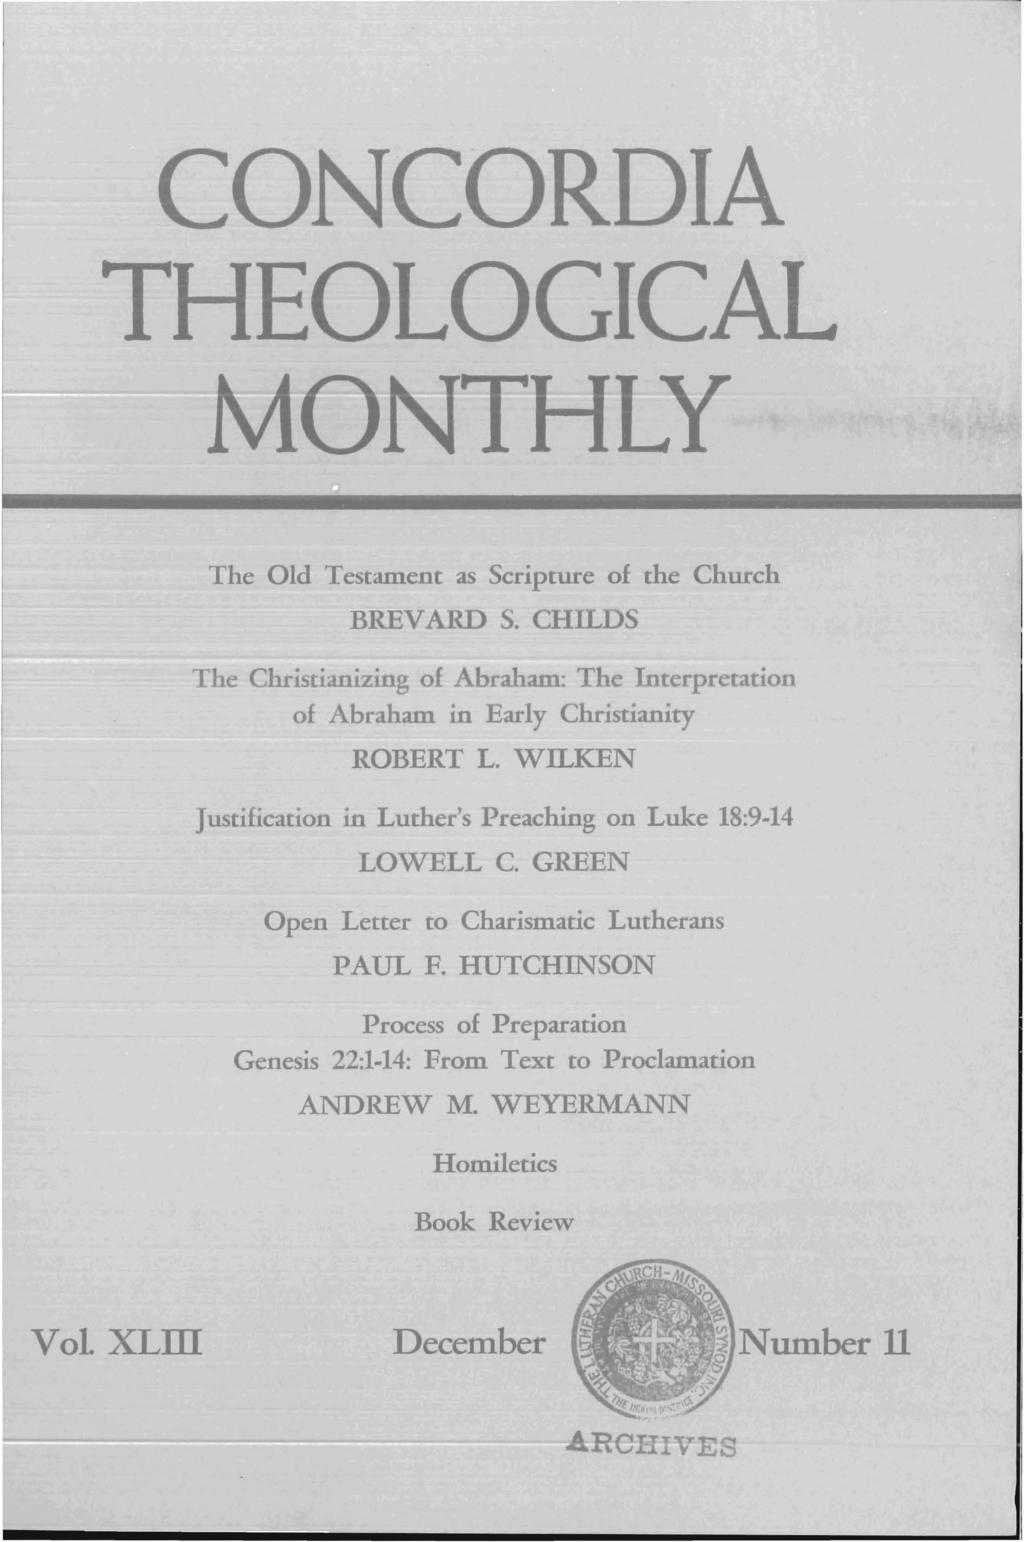 CONCORDIA THEOLOGICAL MONTHLY The Old Testament as Scripture of the Church BREVARD S. CHILDS The Christianizing of Abraham: The Interpretation of Abraham in Early Christianity ROBERT L.